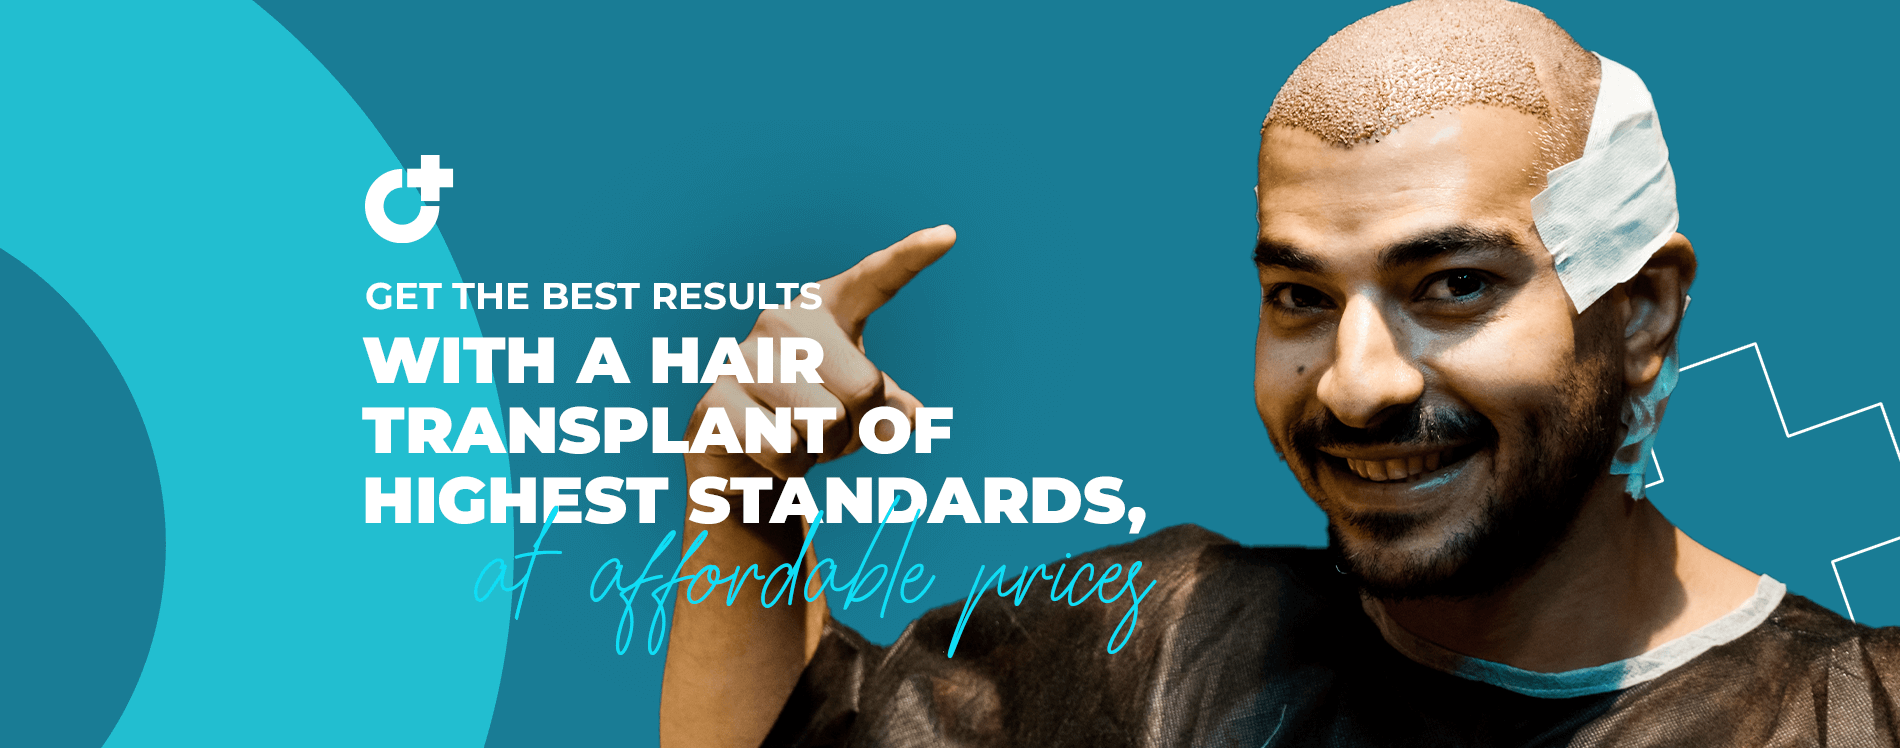 Get the best results with a hair transplant of highest standards, at affordable prices